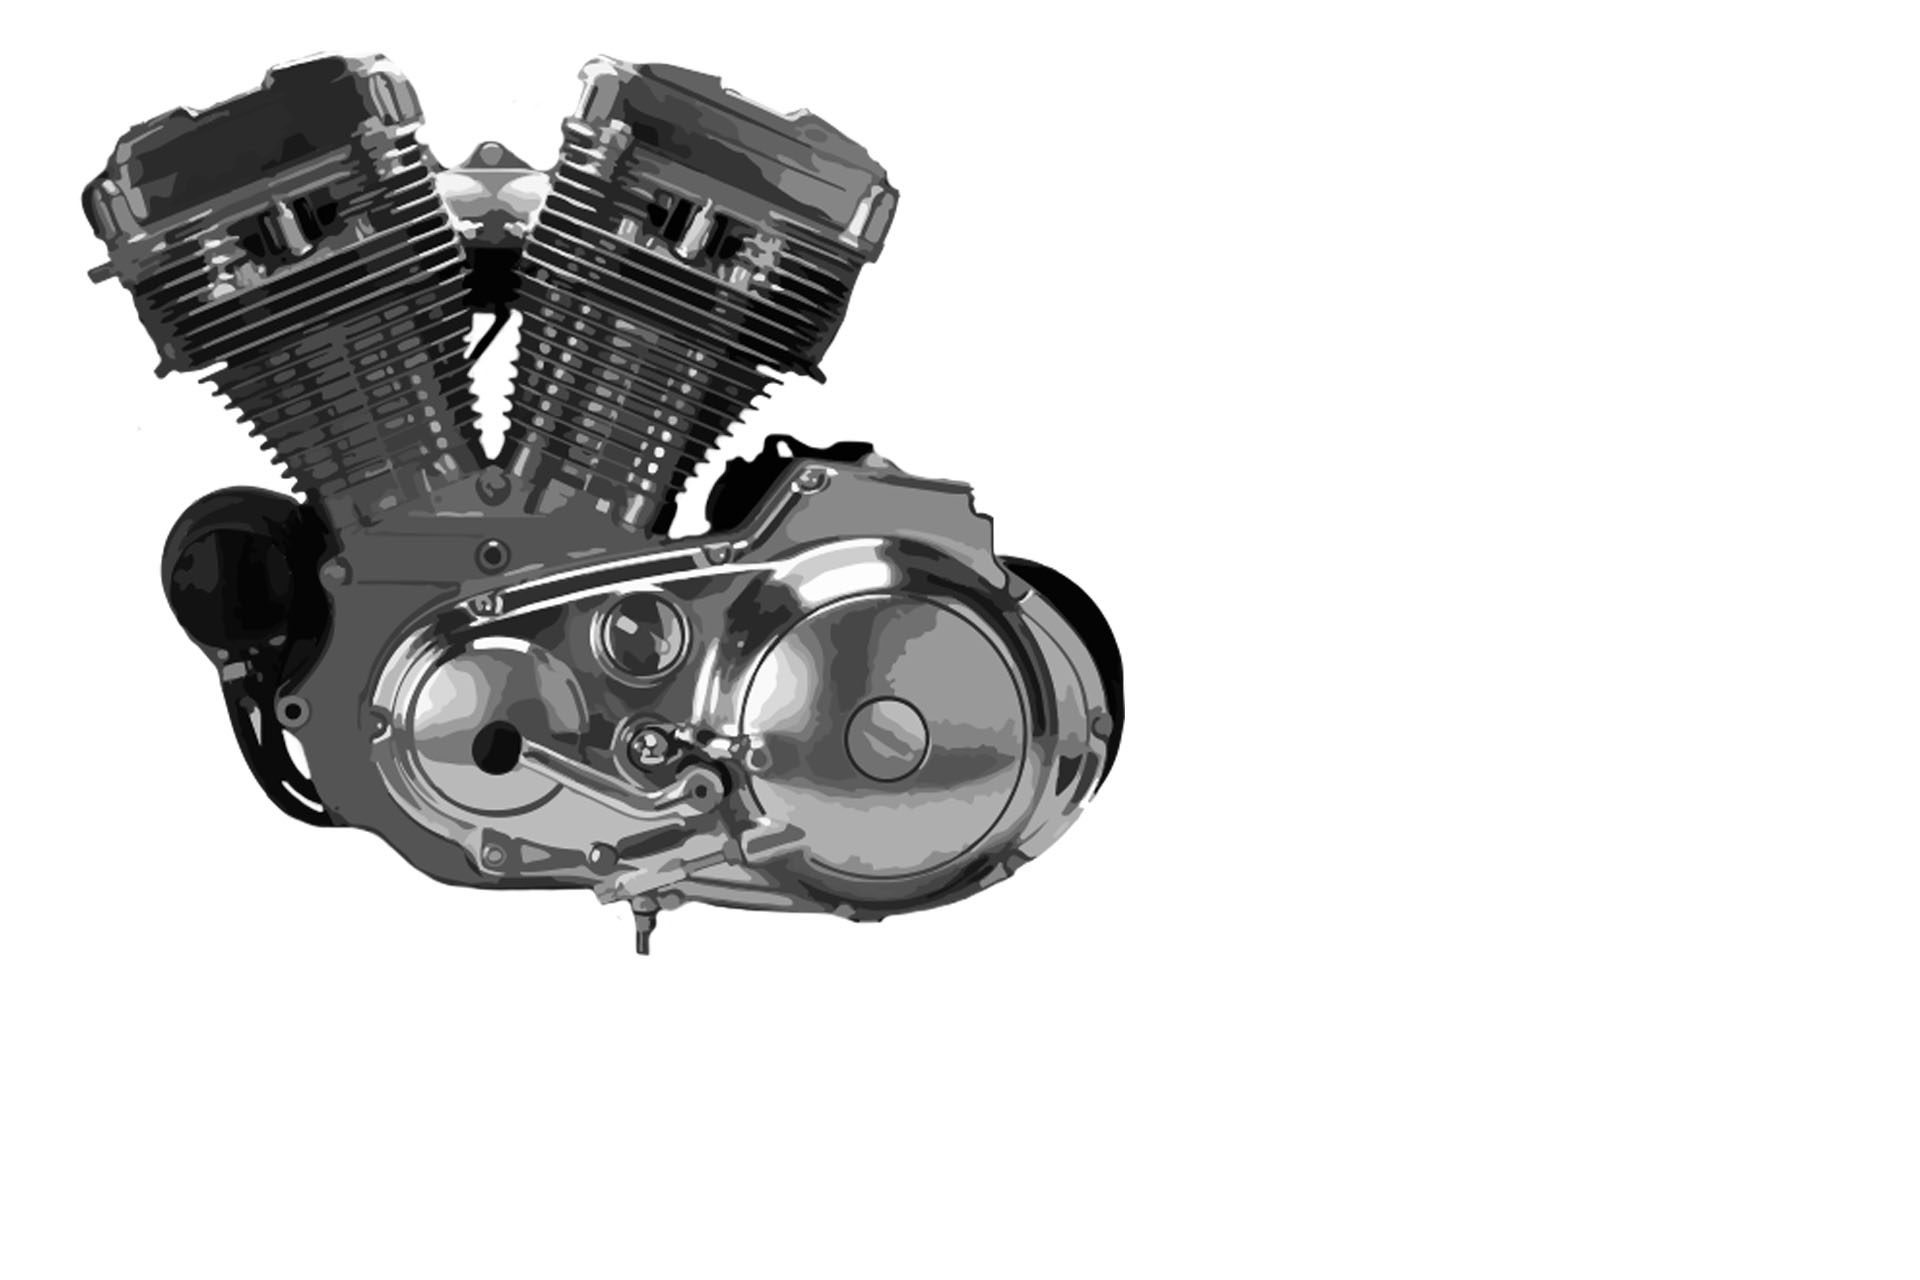 Harley Davidson Unveiled Their Biggest V Twin Ever Screamin Eagle 131 Crate Engine Top Speed